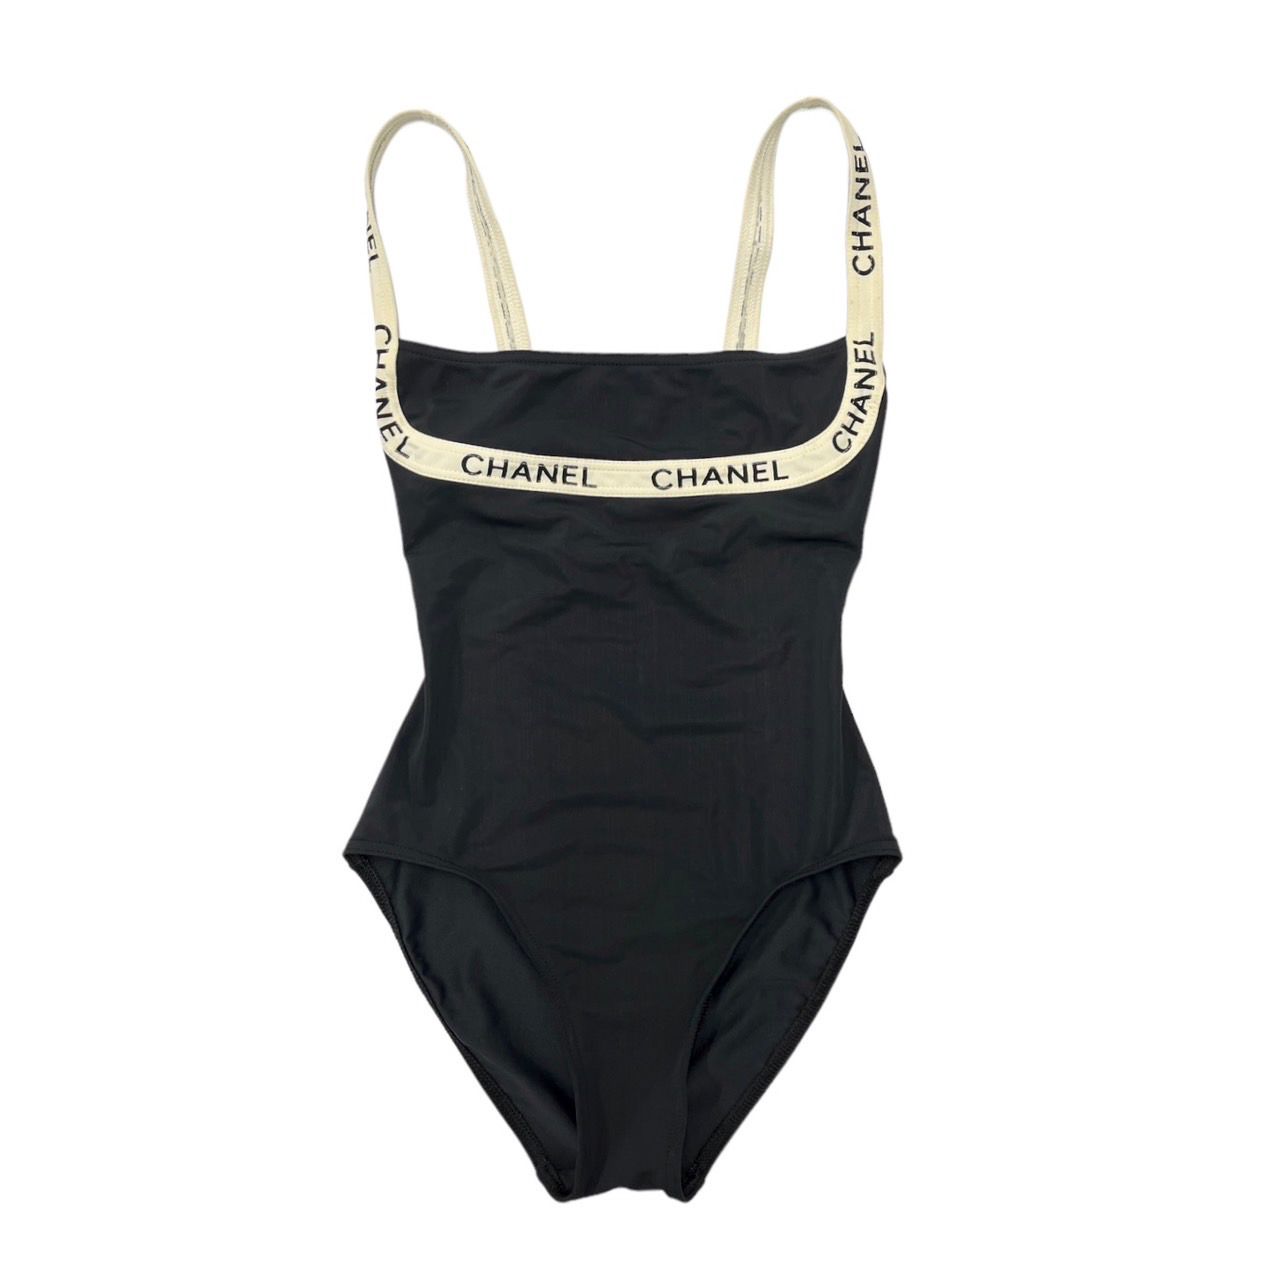 Chanel Black Clear Logo One Piece Bathing Suit 01P Size 38 NEW